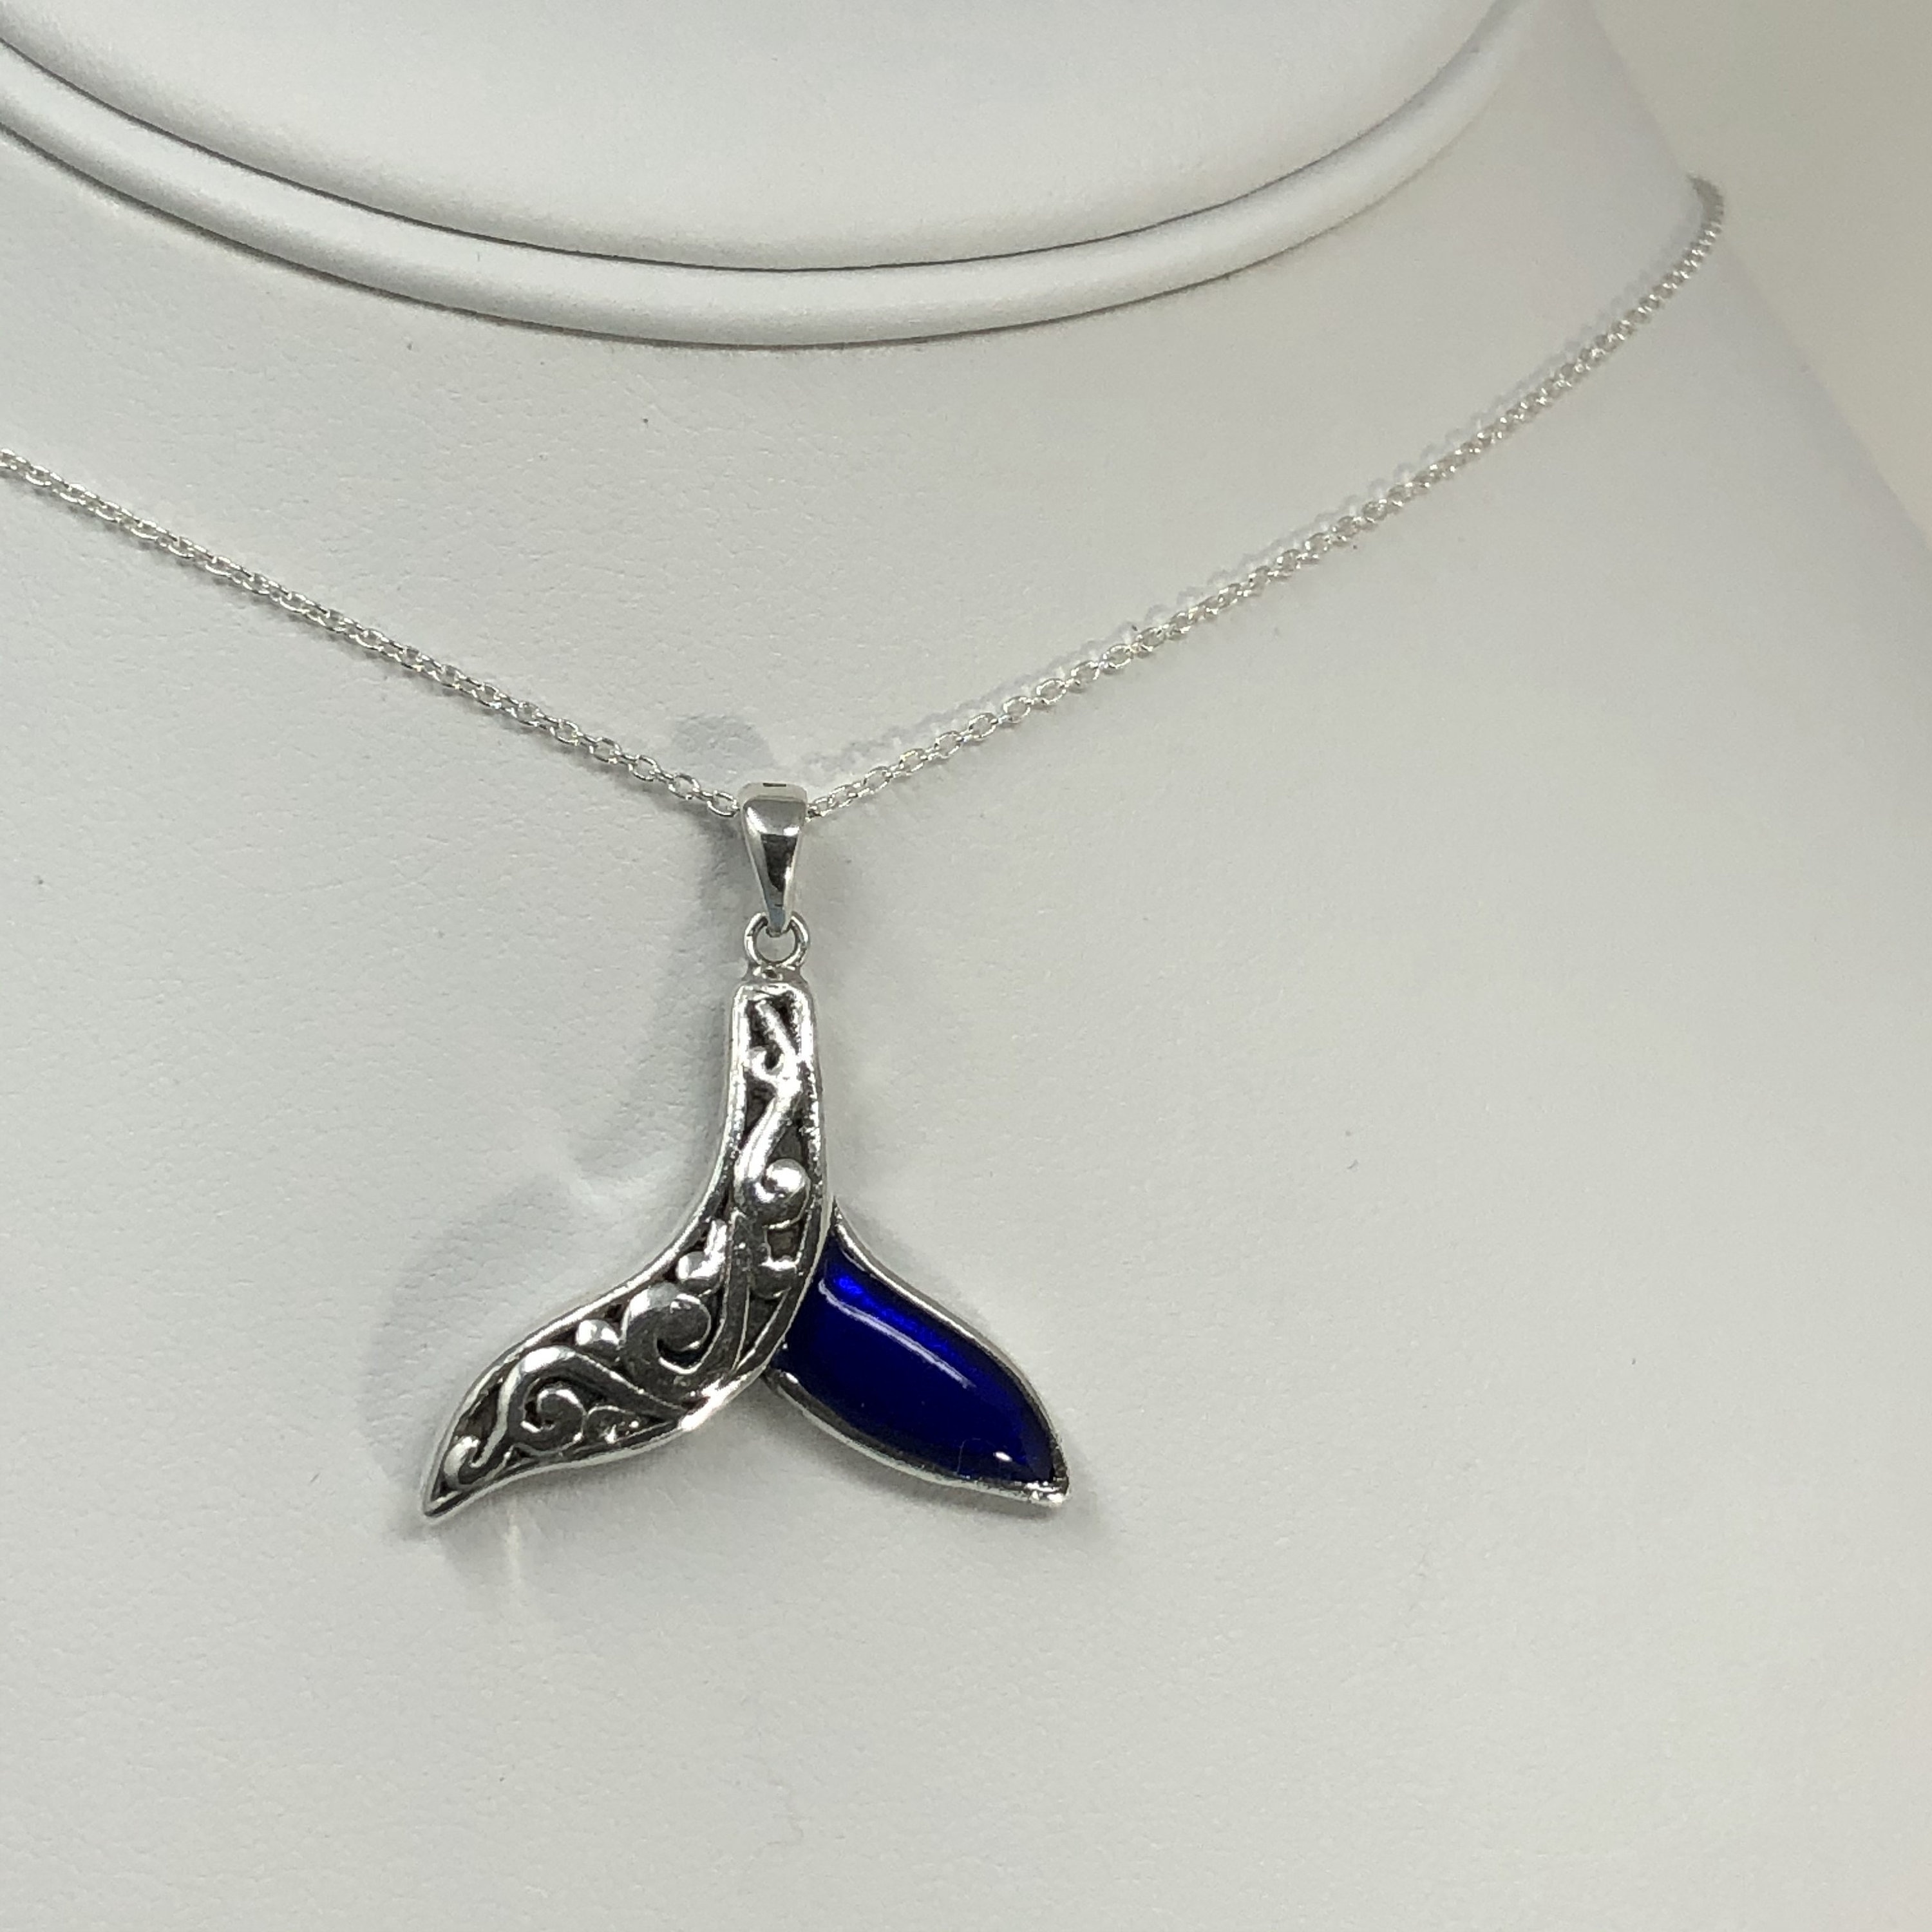 Jewels Obsession Whale Tale Necklace Rhodium-plated 925 Silver Whale Tale Pendant with 24 Necklace 